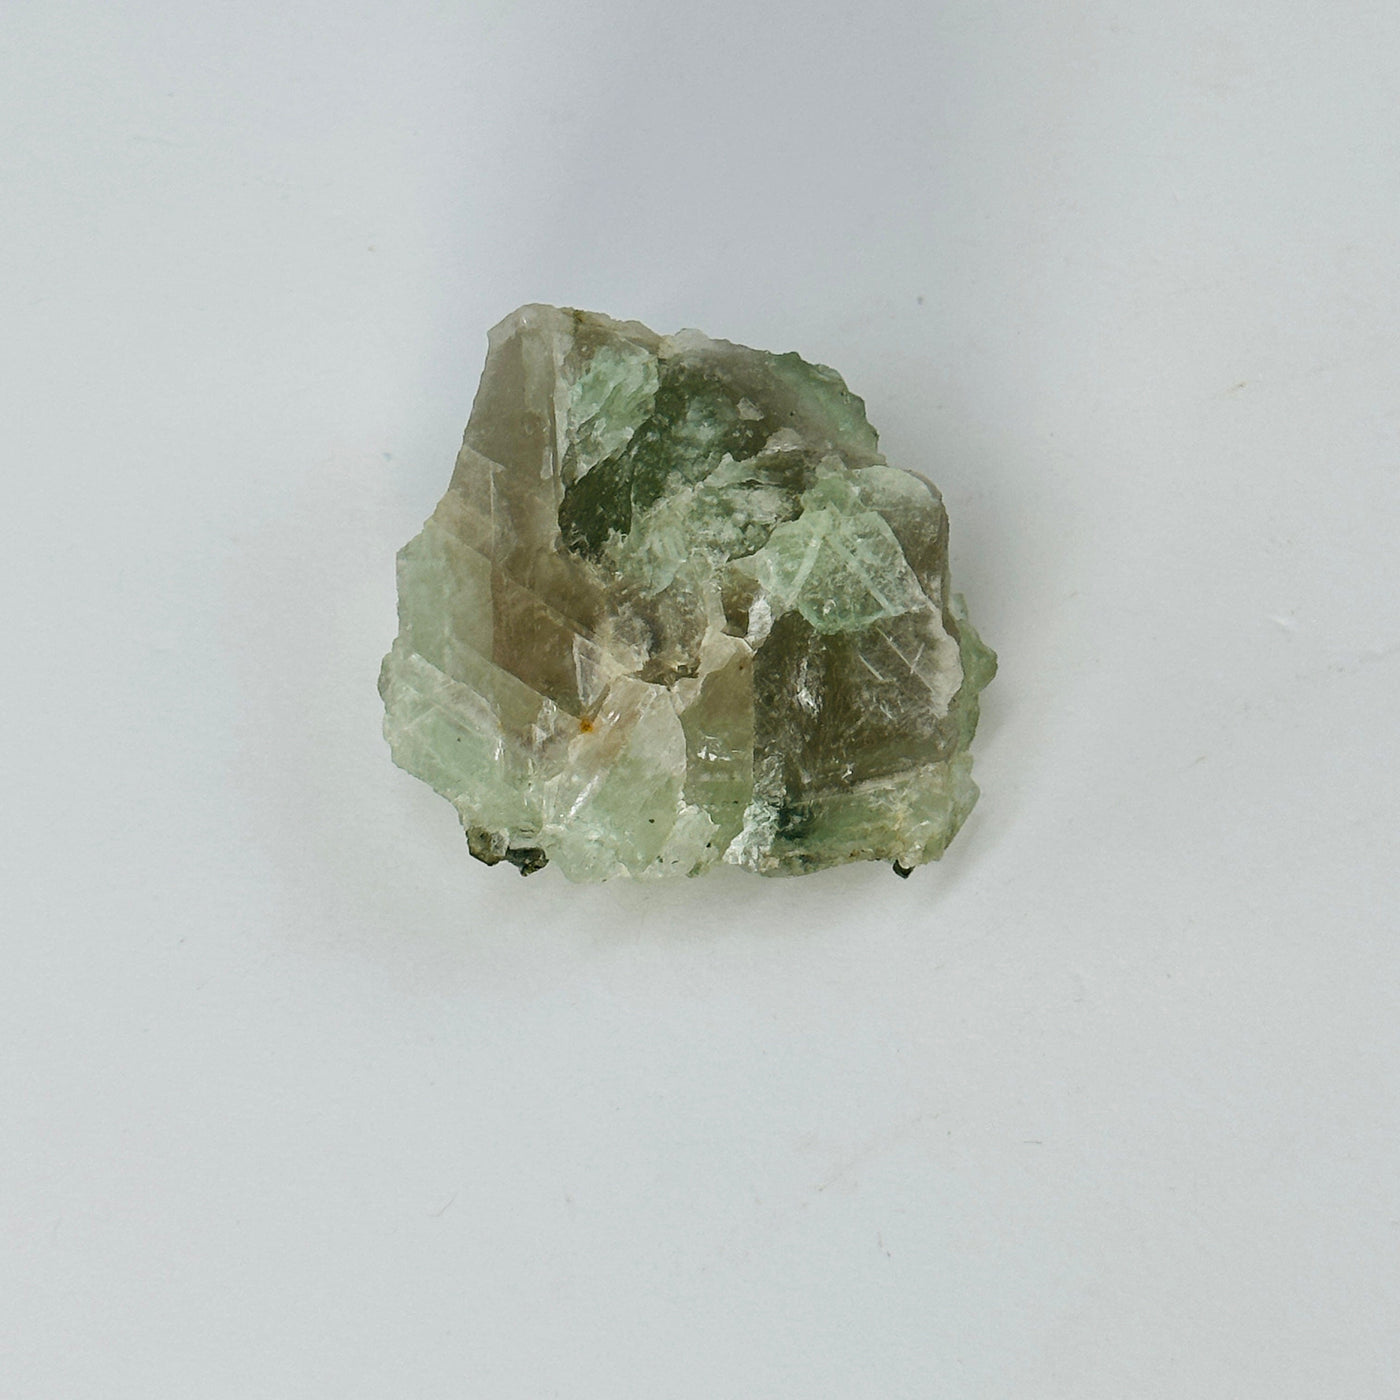 backside of green fluorite with epidote growth on white background